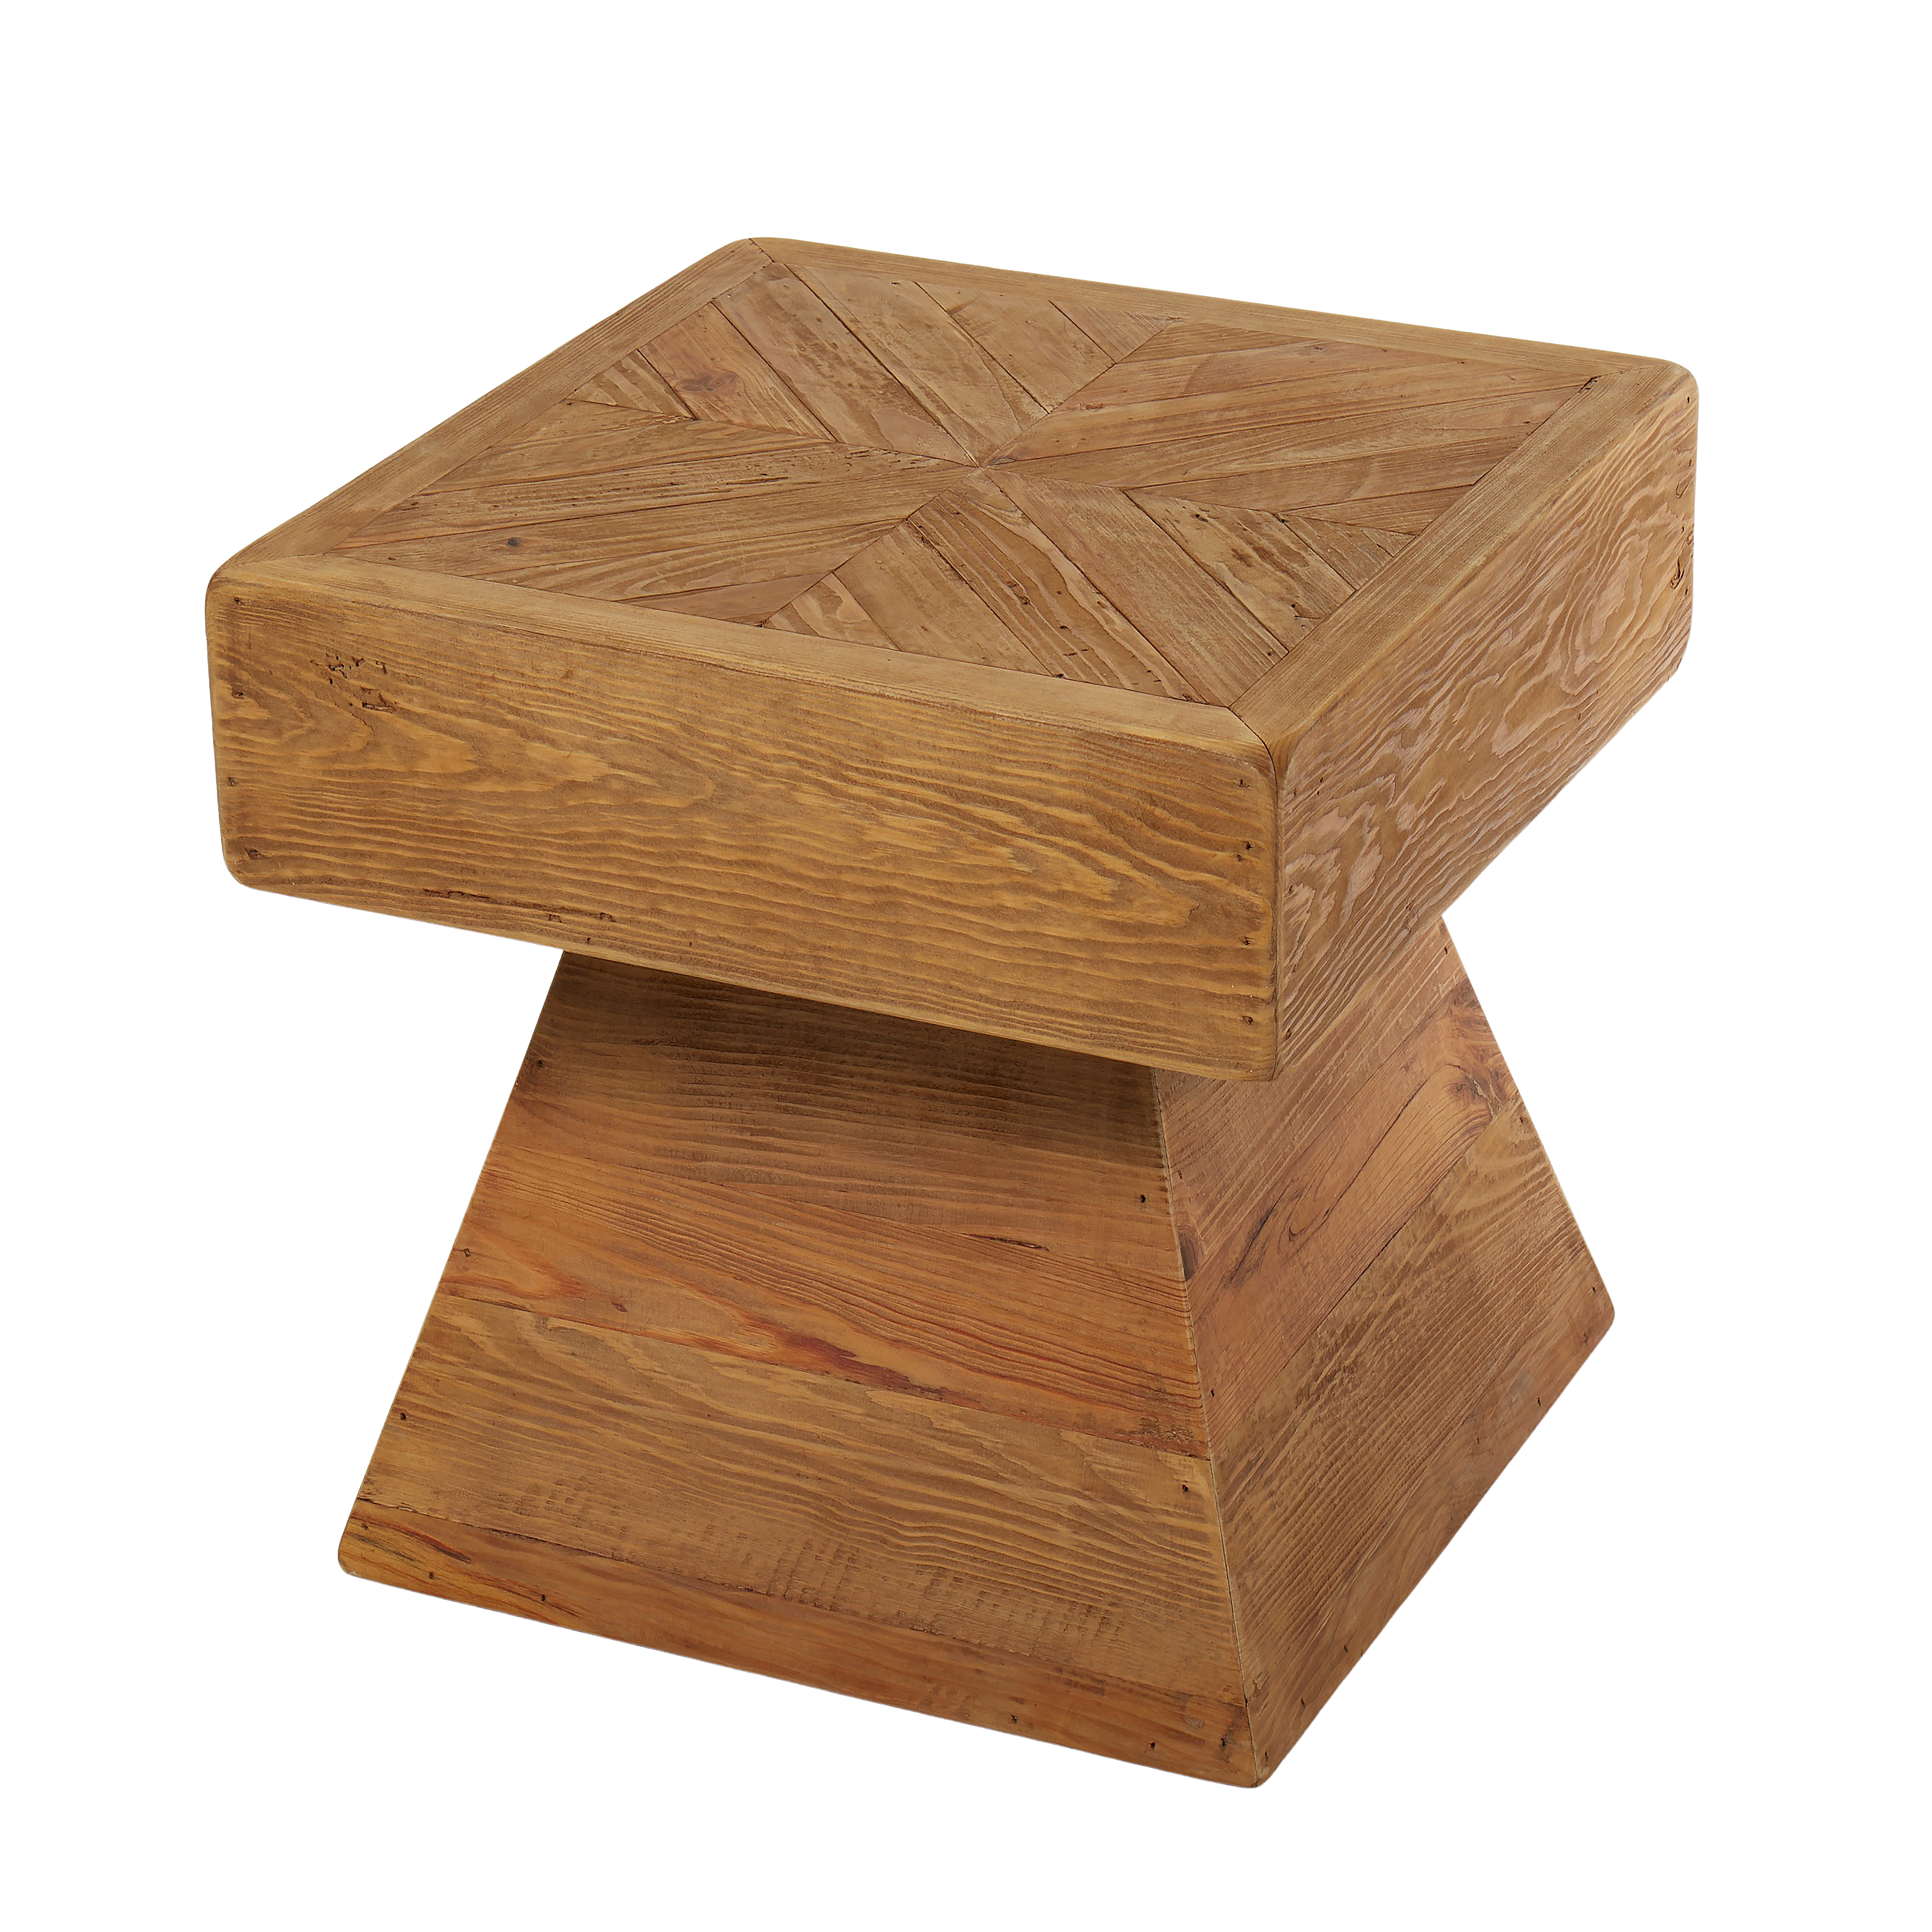 Amalfi Reclaimed Pine Wood Square Side Table Home & Office Decoration Natural